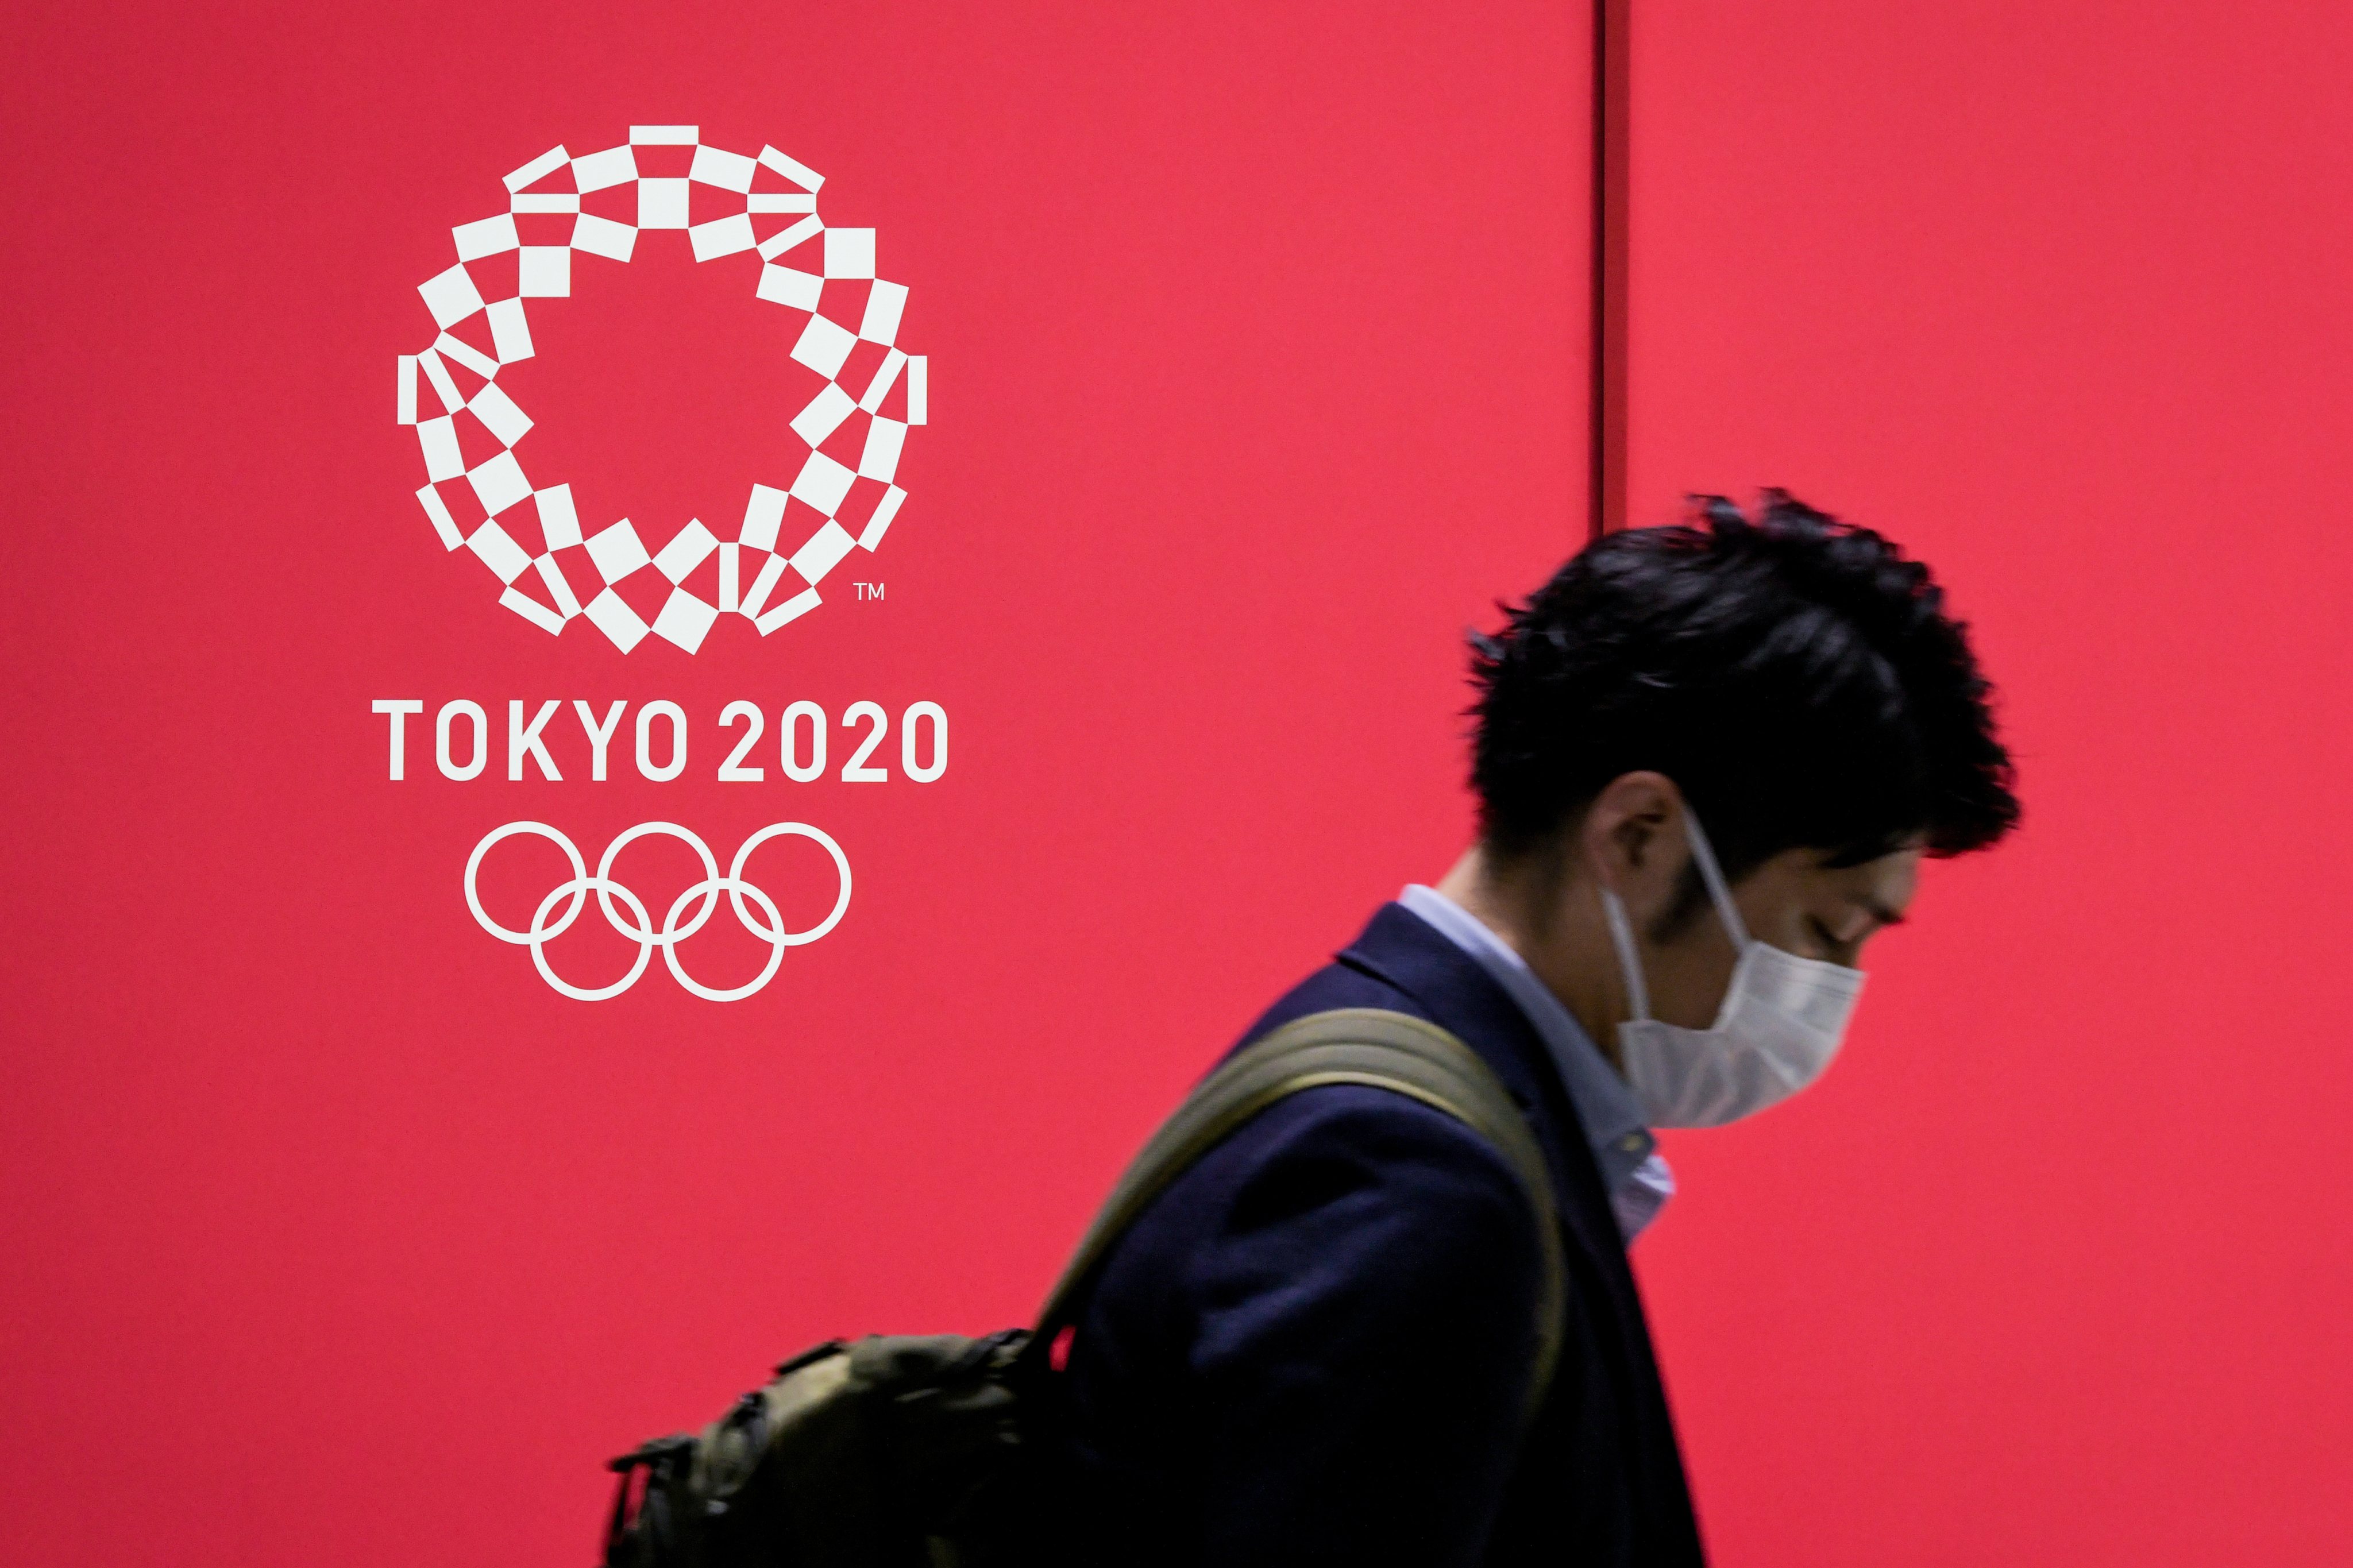 A man walks past a Tokyo 2020 advertising poster at the